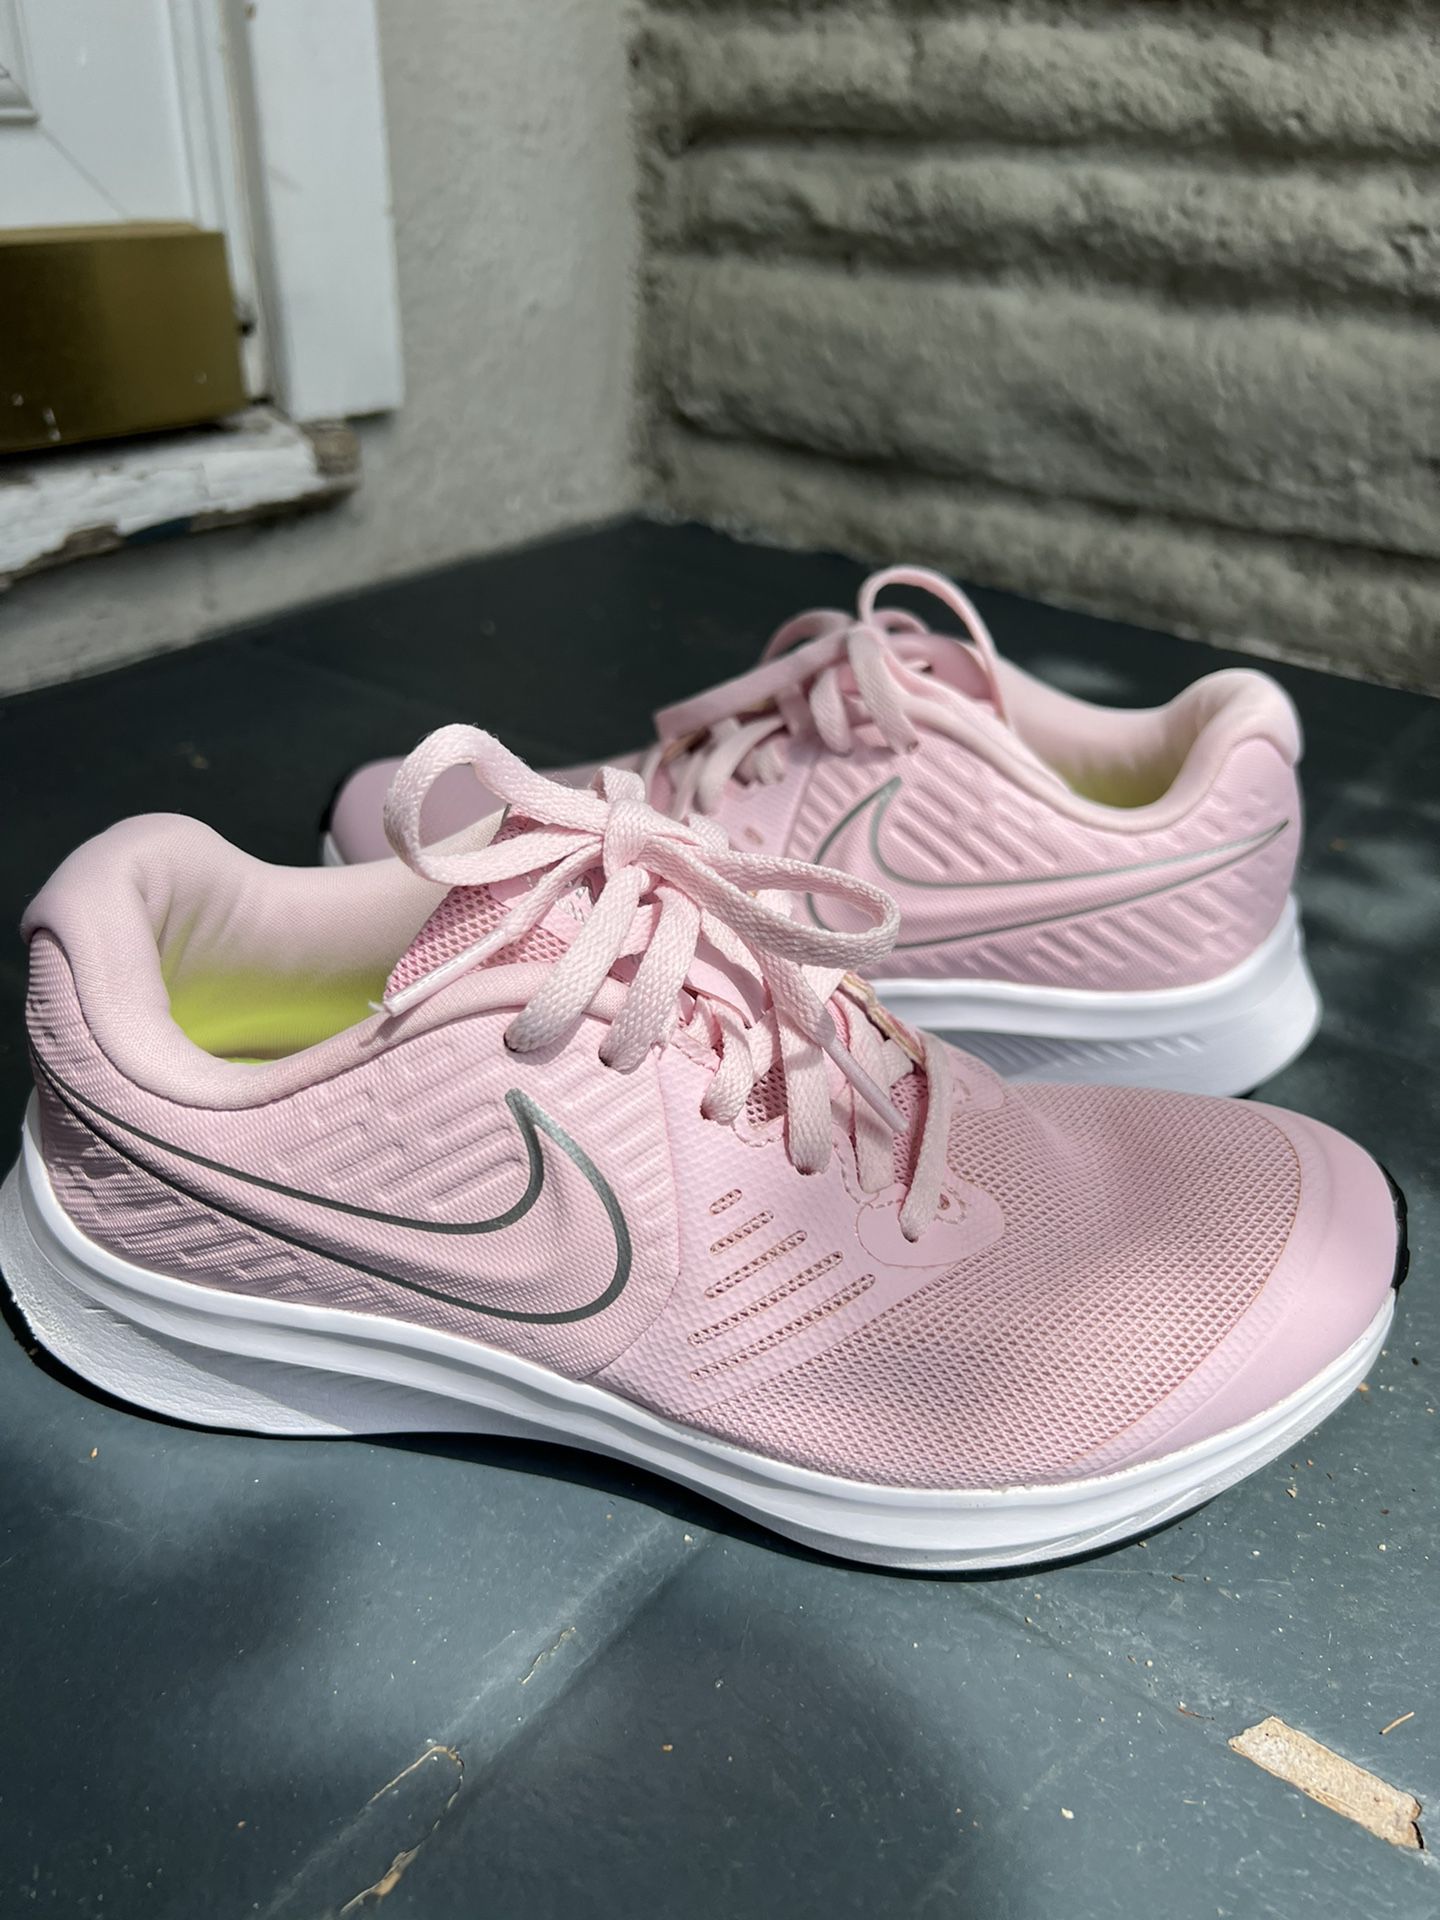 Escribe un reporte Levántate Reorganizar Girls Nike Star Runner 2 GS 'Pink Foam' AQ3542-601 Girls Pink Running Shoes  Size 3.5 for Sale in Los Angeles, CA - OfferUp